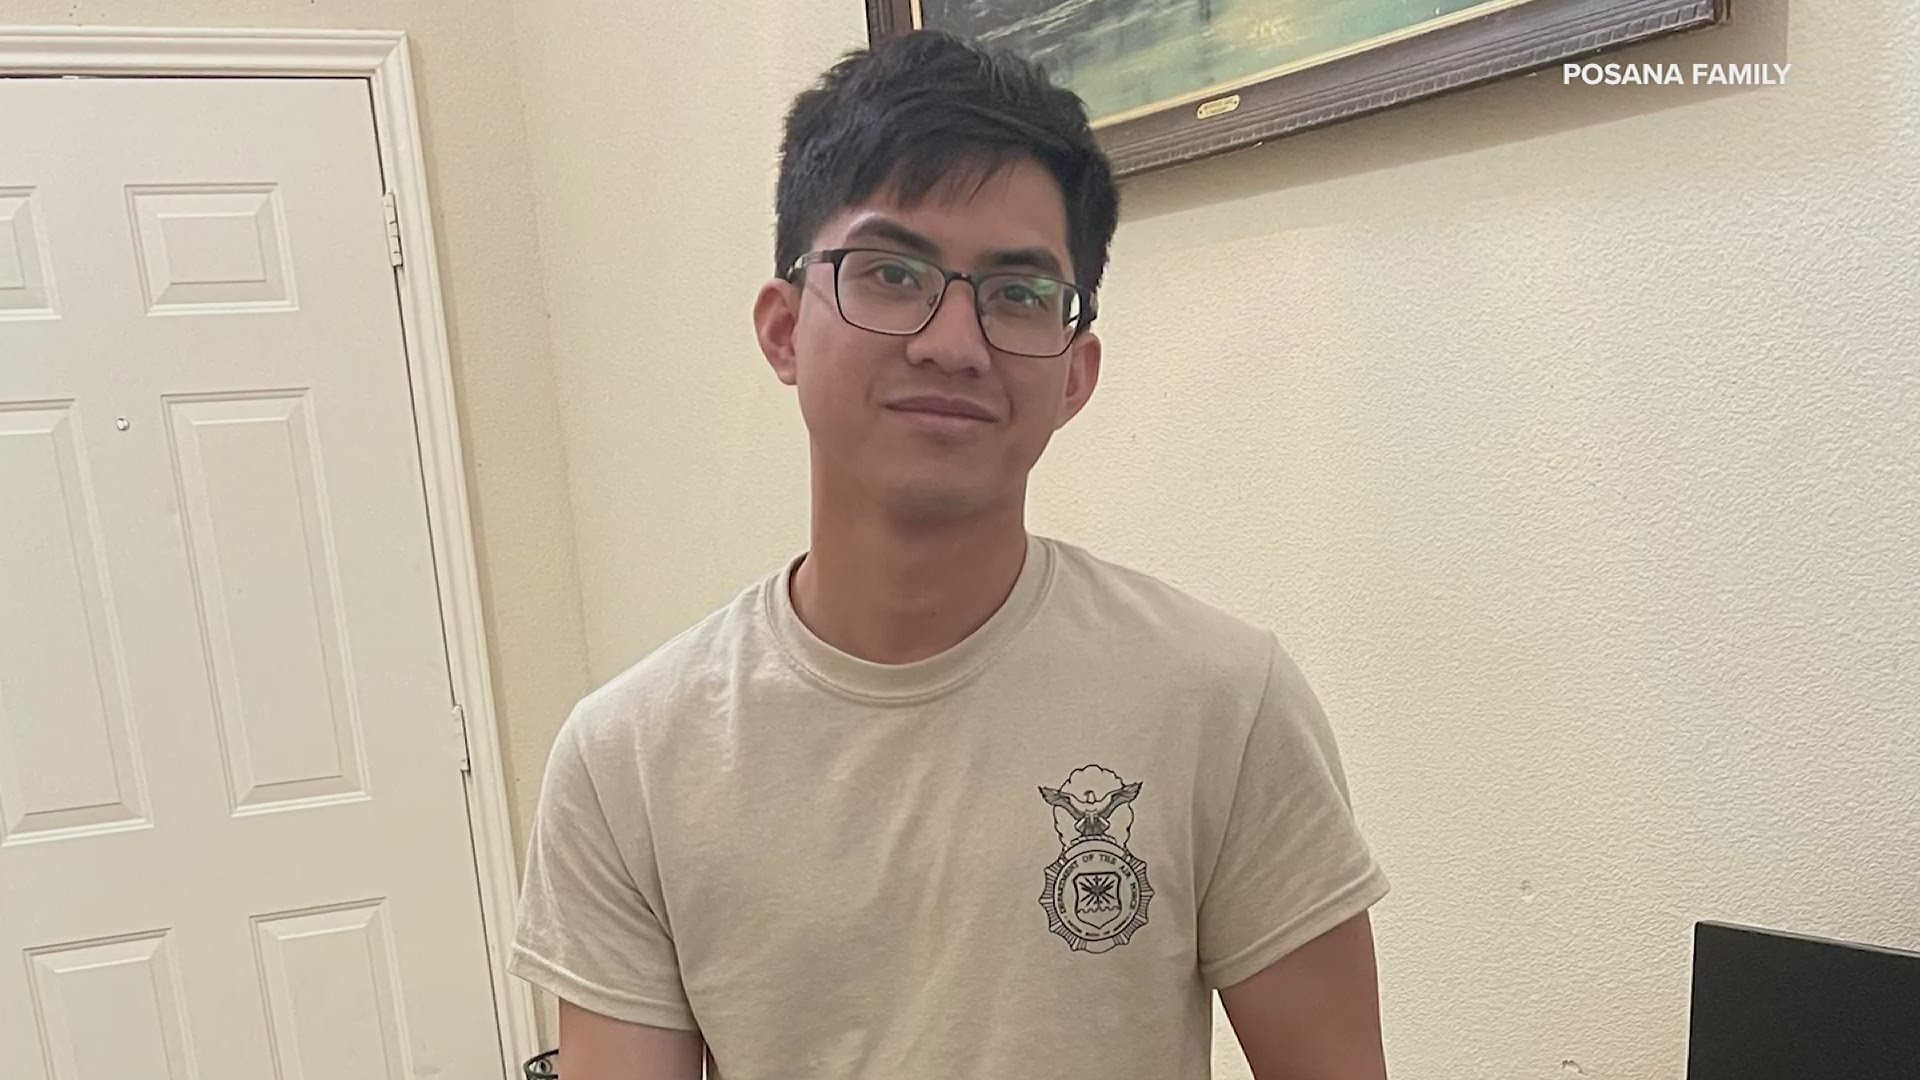 Brazoria County deputies got a call about 7 a.m. Tuesday saying Elijah Posana had been found just north of where he rescued his younger cousins from the rip tide.